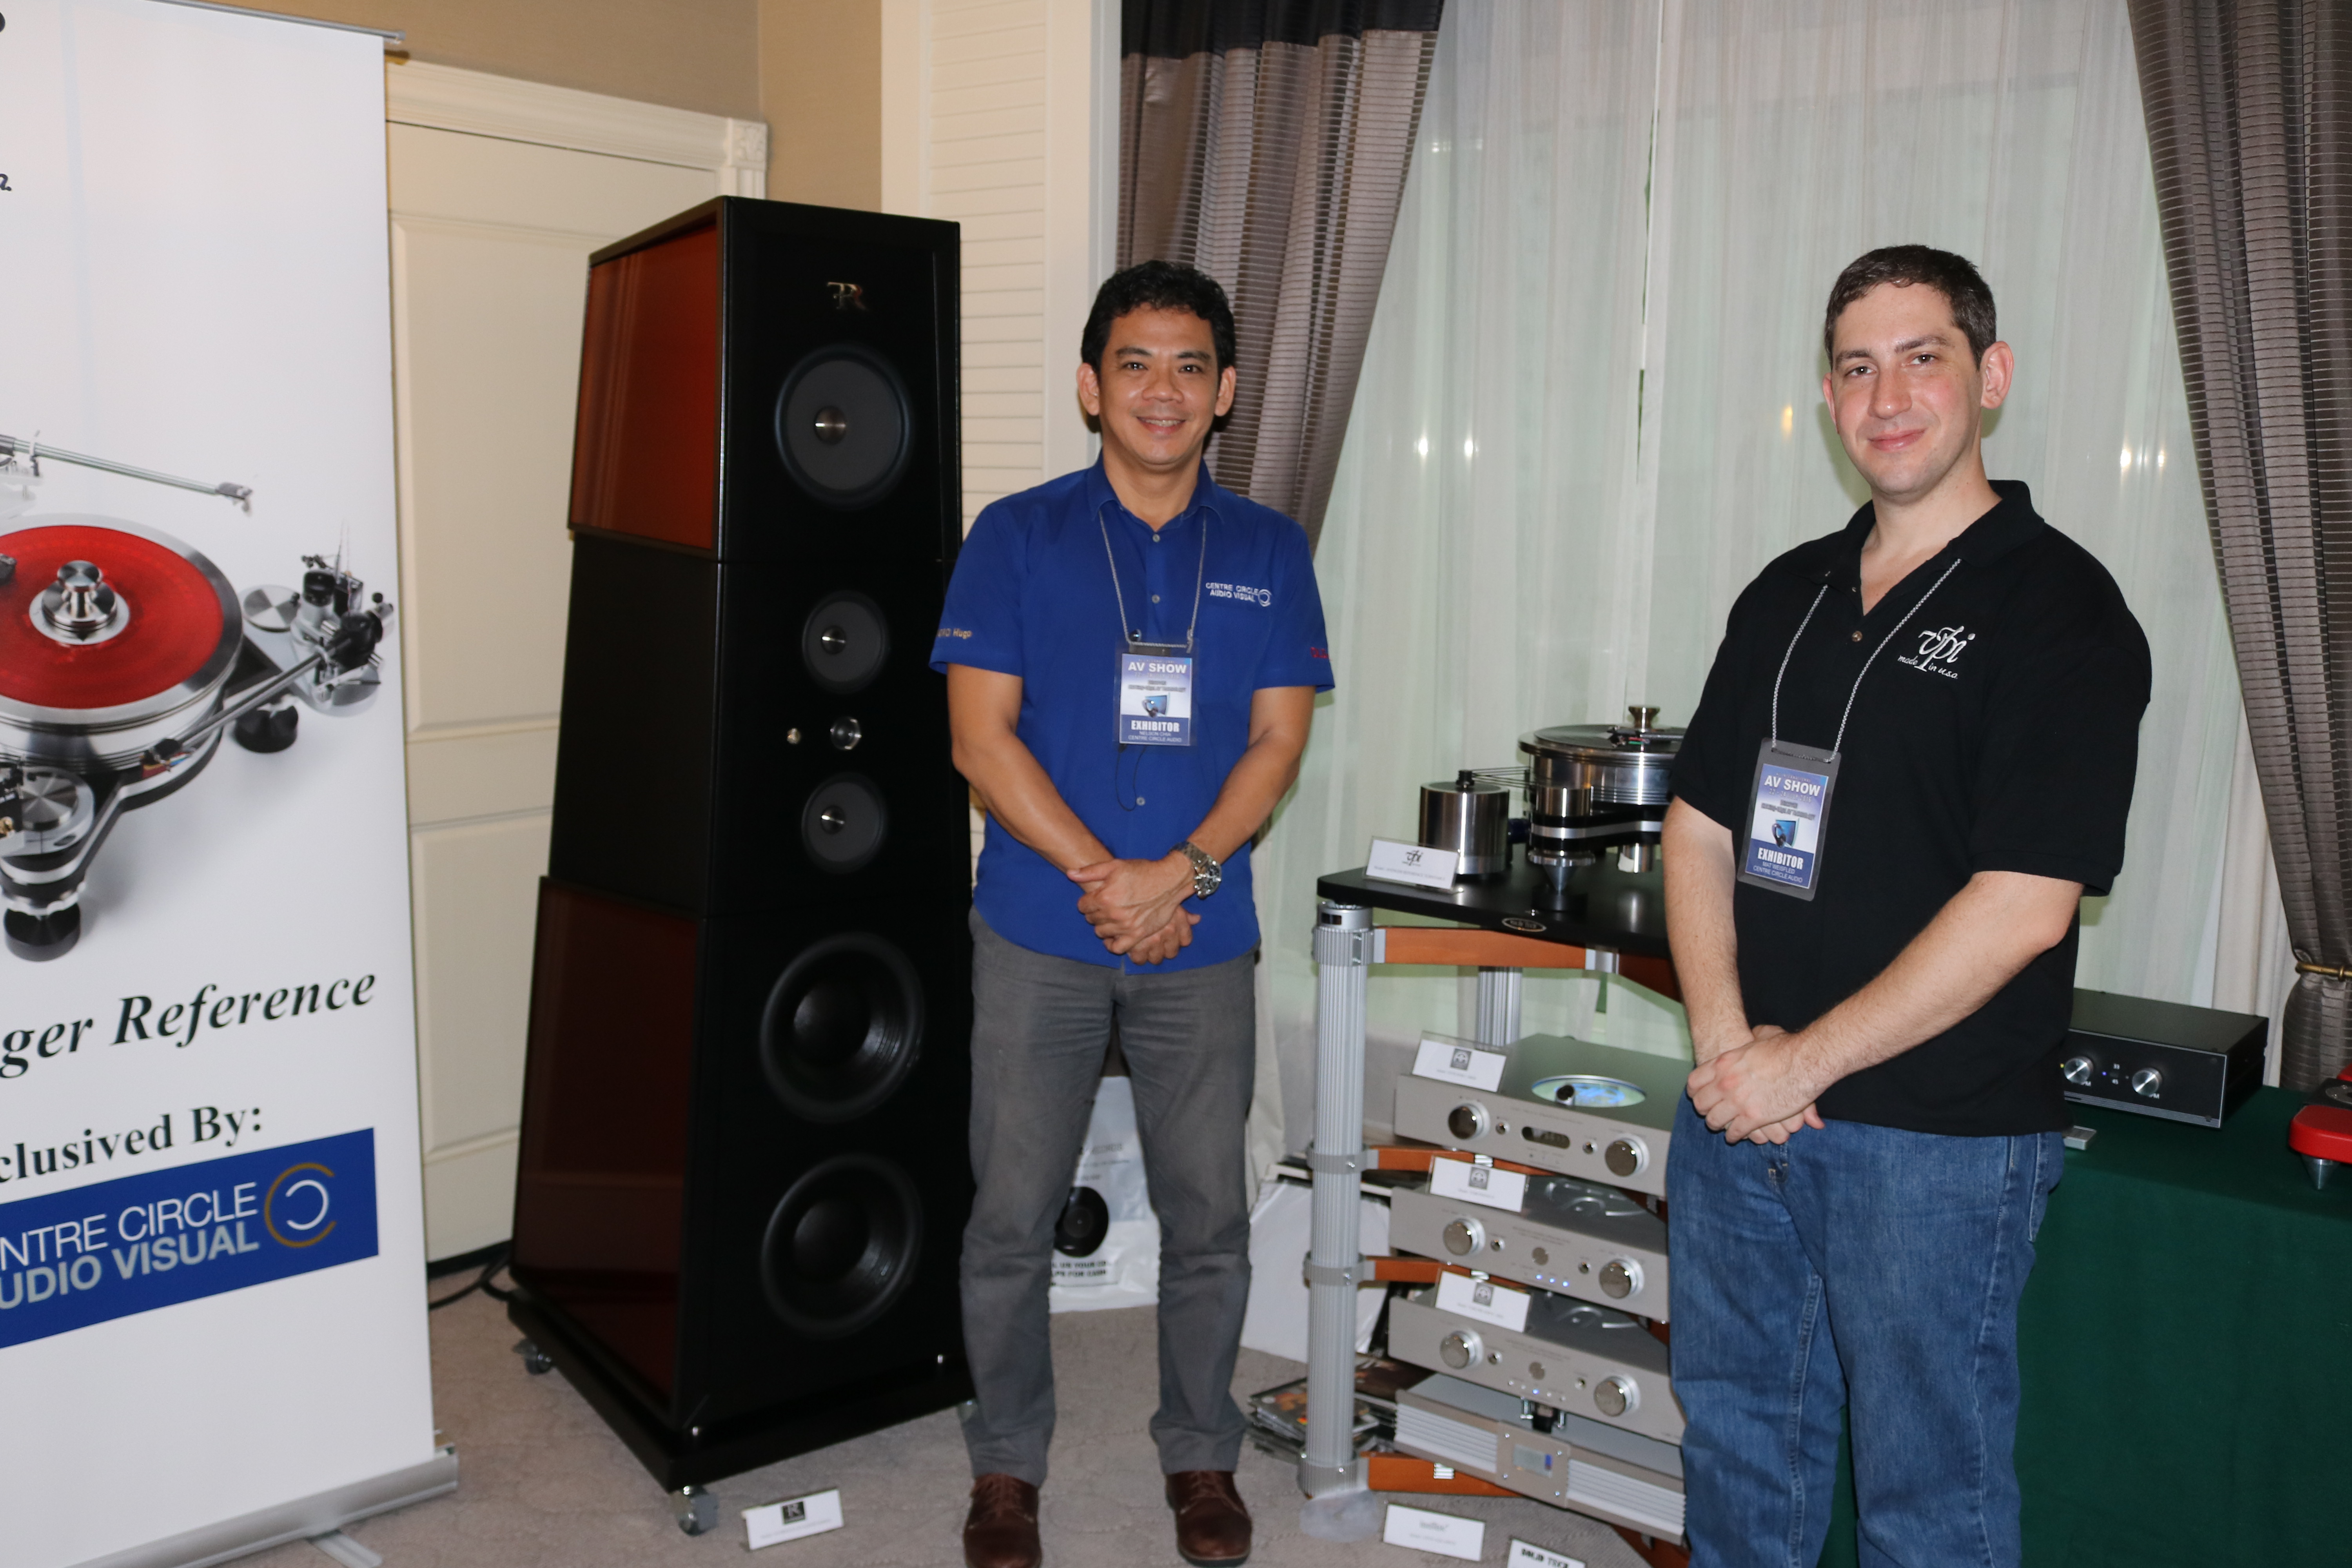 Nelson and Mathew Weisfeld (popularly known as Mat), the younger son of VPI Industries Inc founders Sheila and Harry Weisfeld. Note the gigantic Rosso Florentino’s flagship loudspeakers – Florentia - behind Nelson.